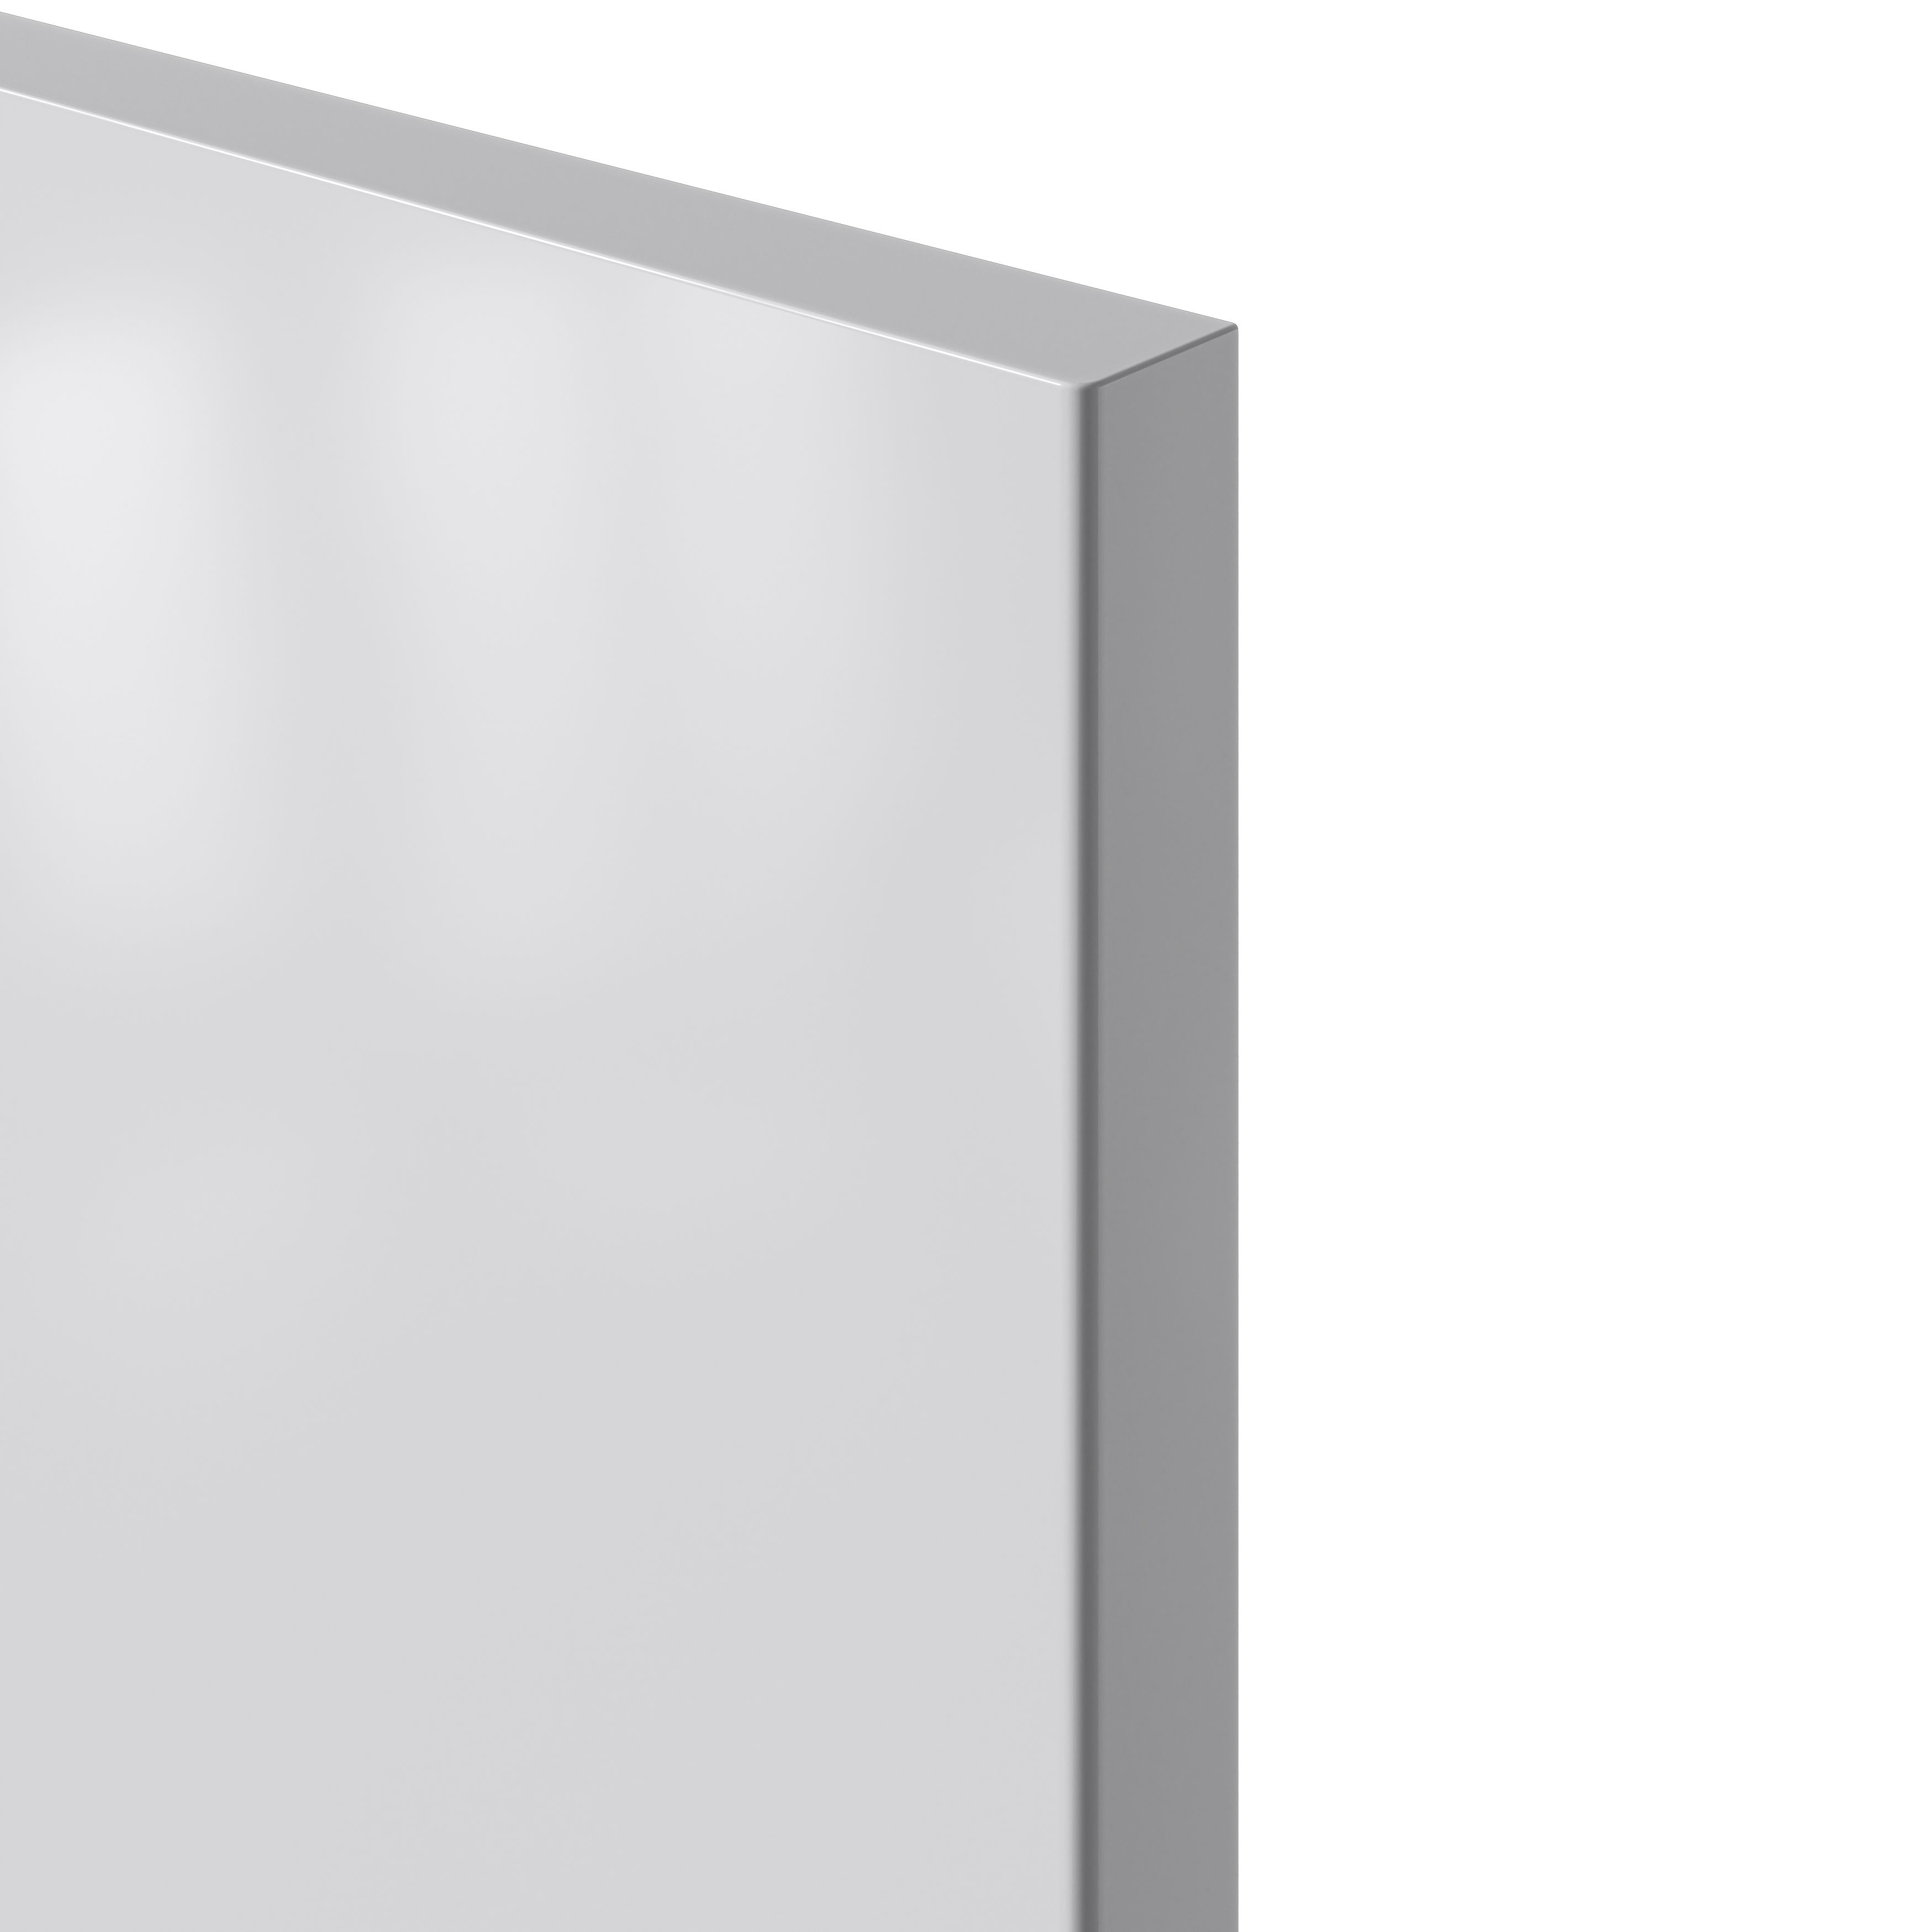 GoodHome Stevia Gloss grey slab Drawerline door & drawer front, (W)400mm (H)715mm (T)18mm